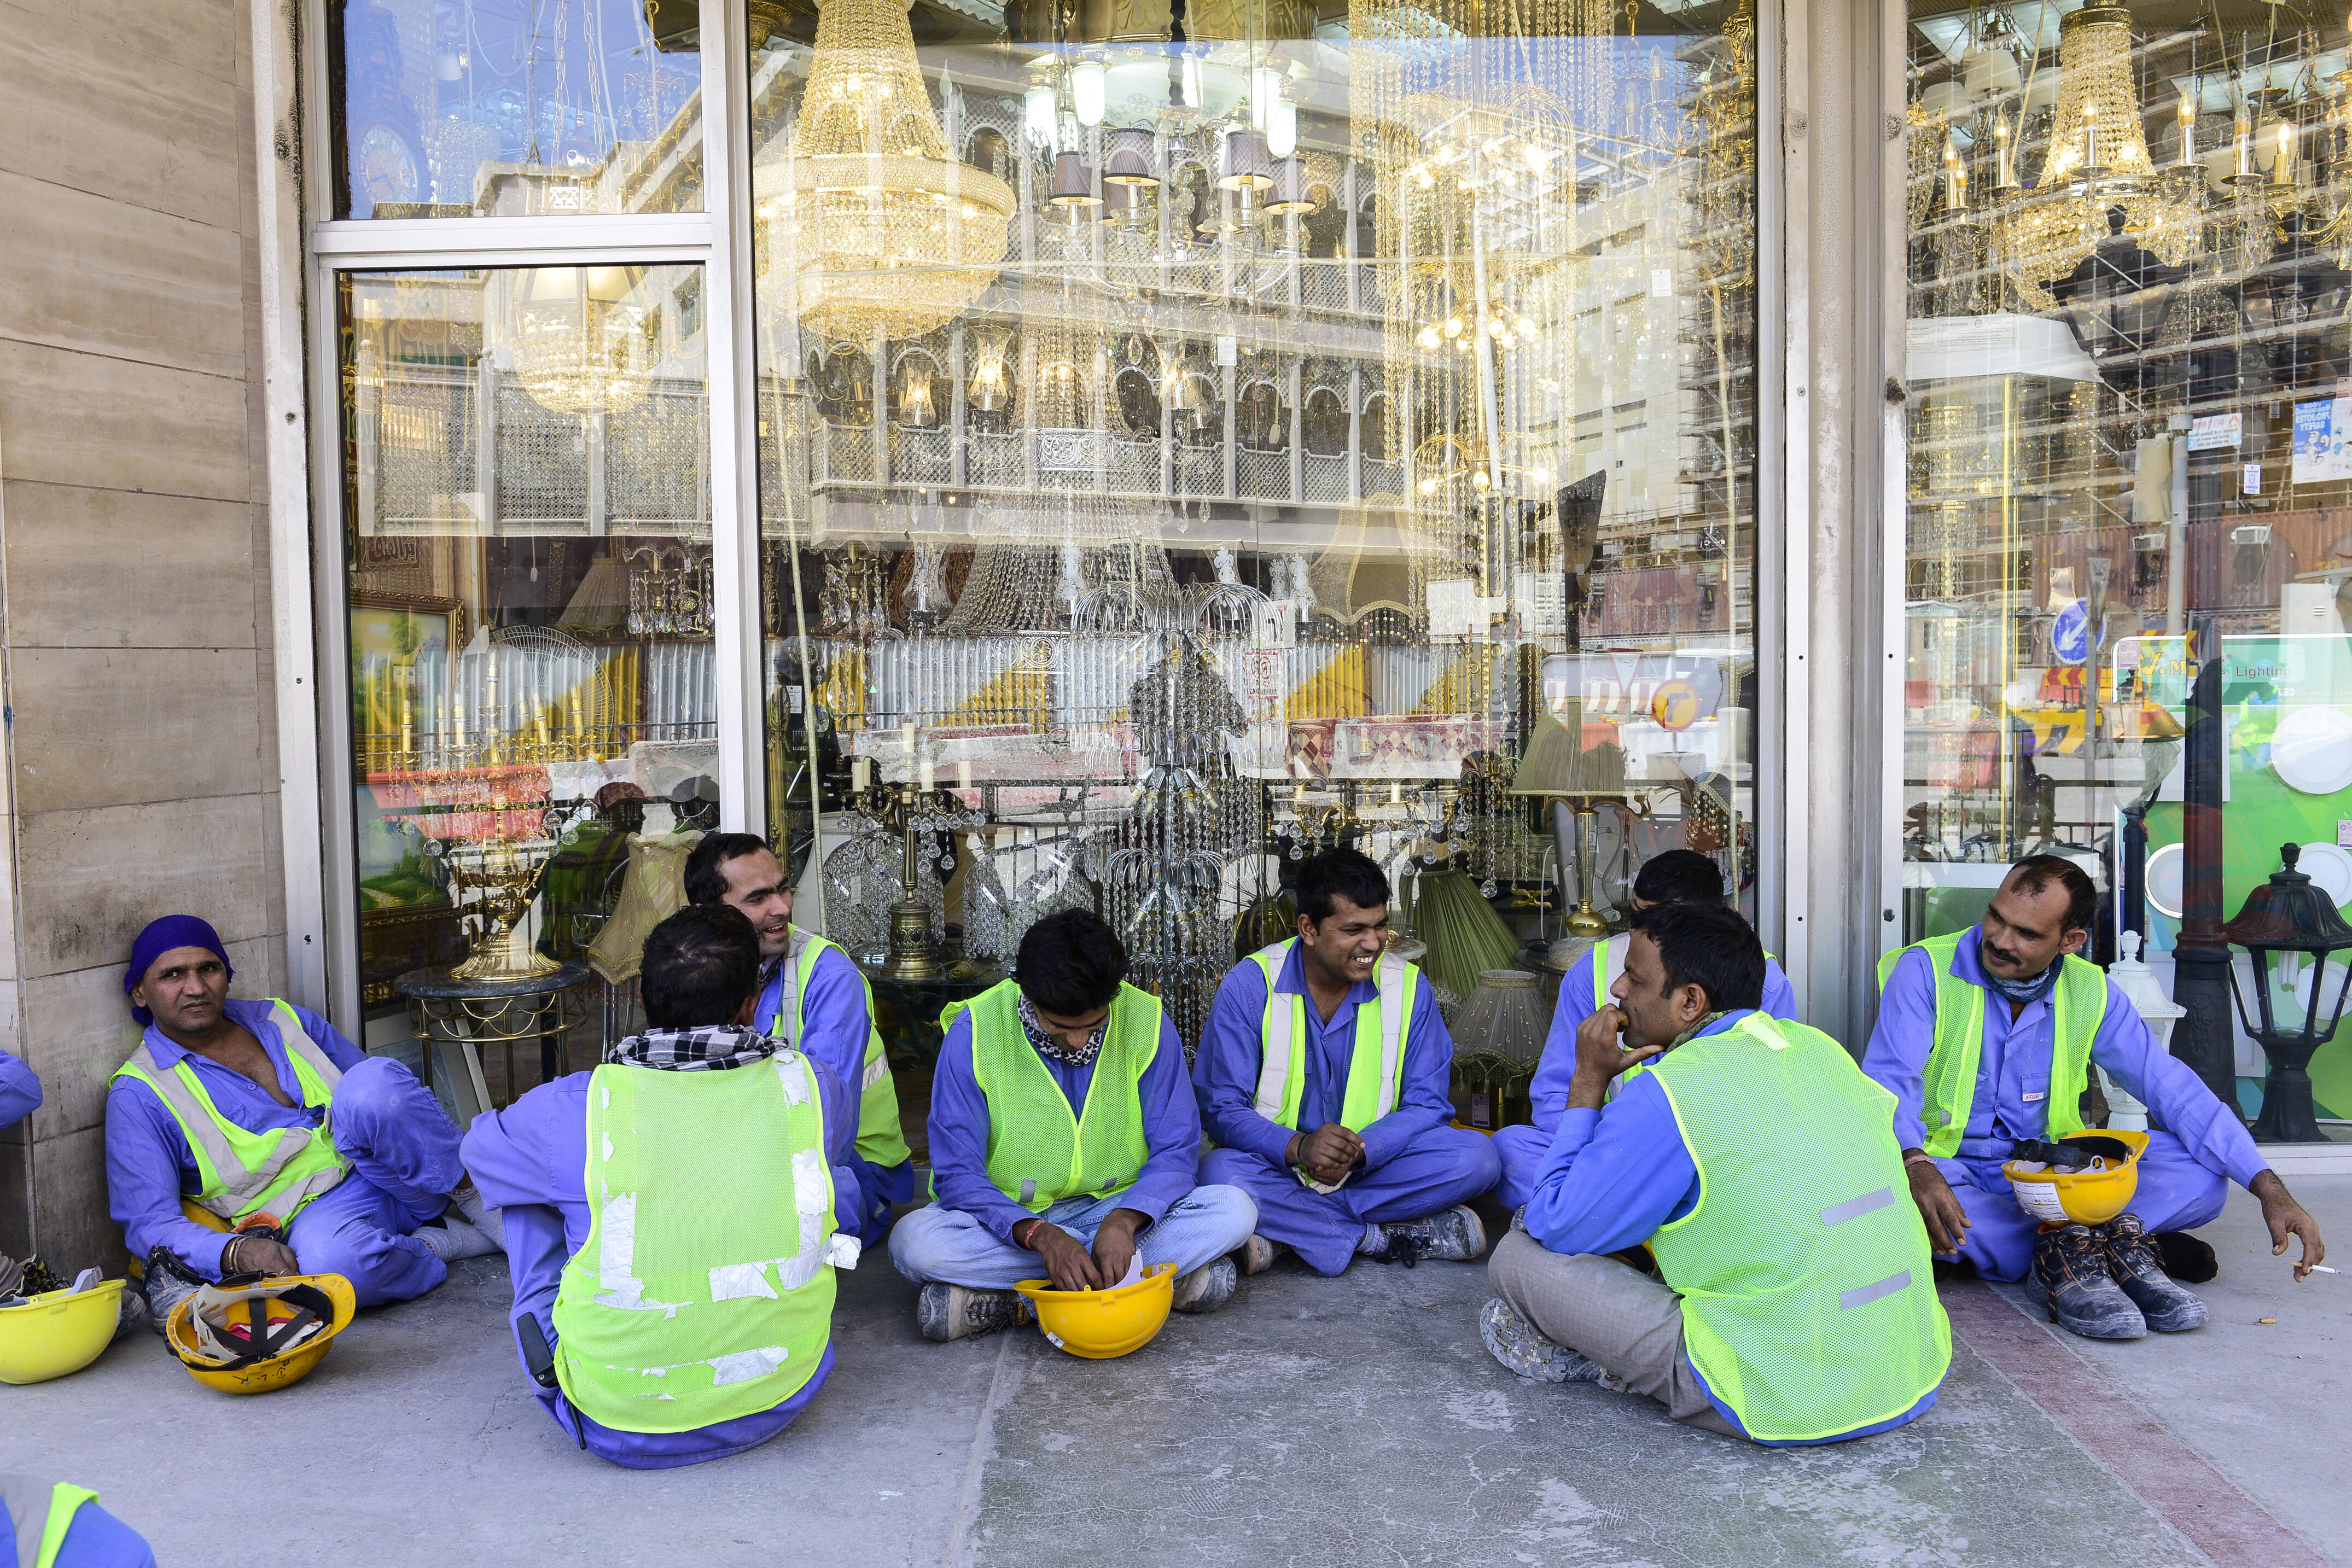 Migrant workers from all over the world waiting for their lunch at one of the construction sites for the FIFA World Cup in Qatar